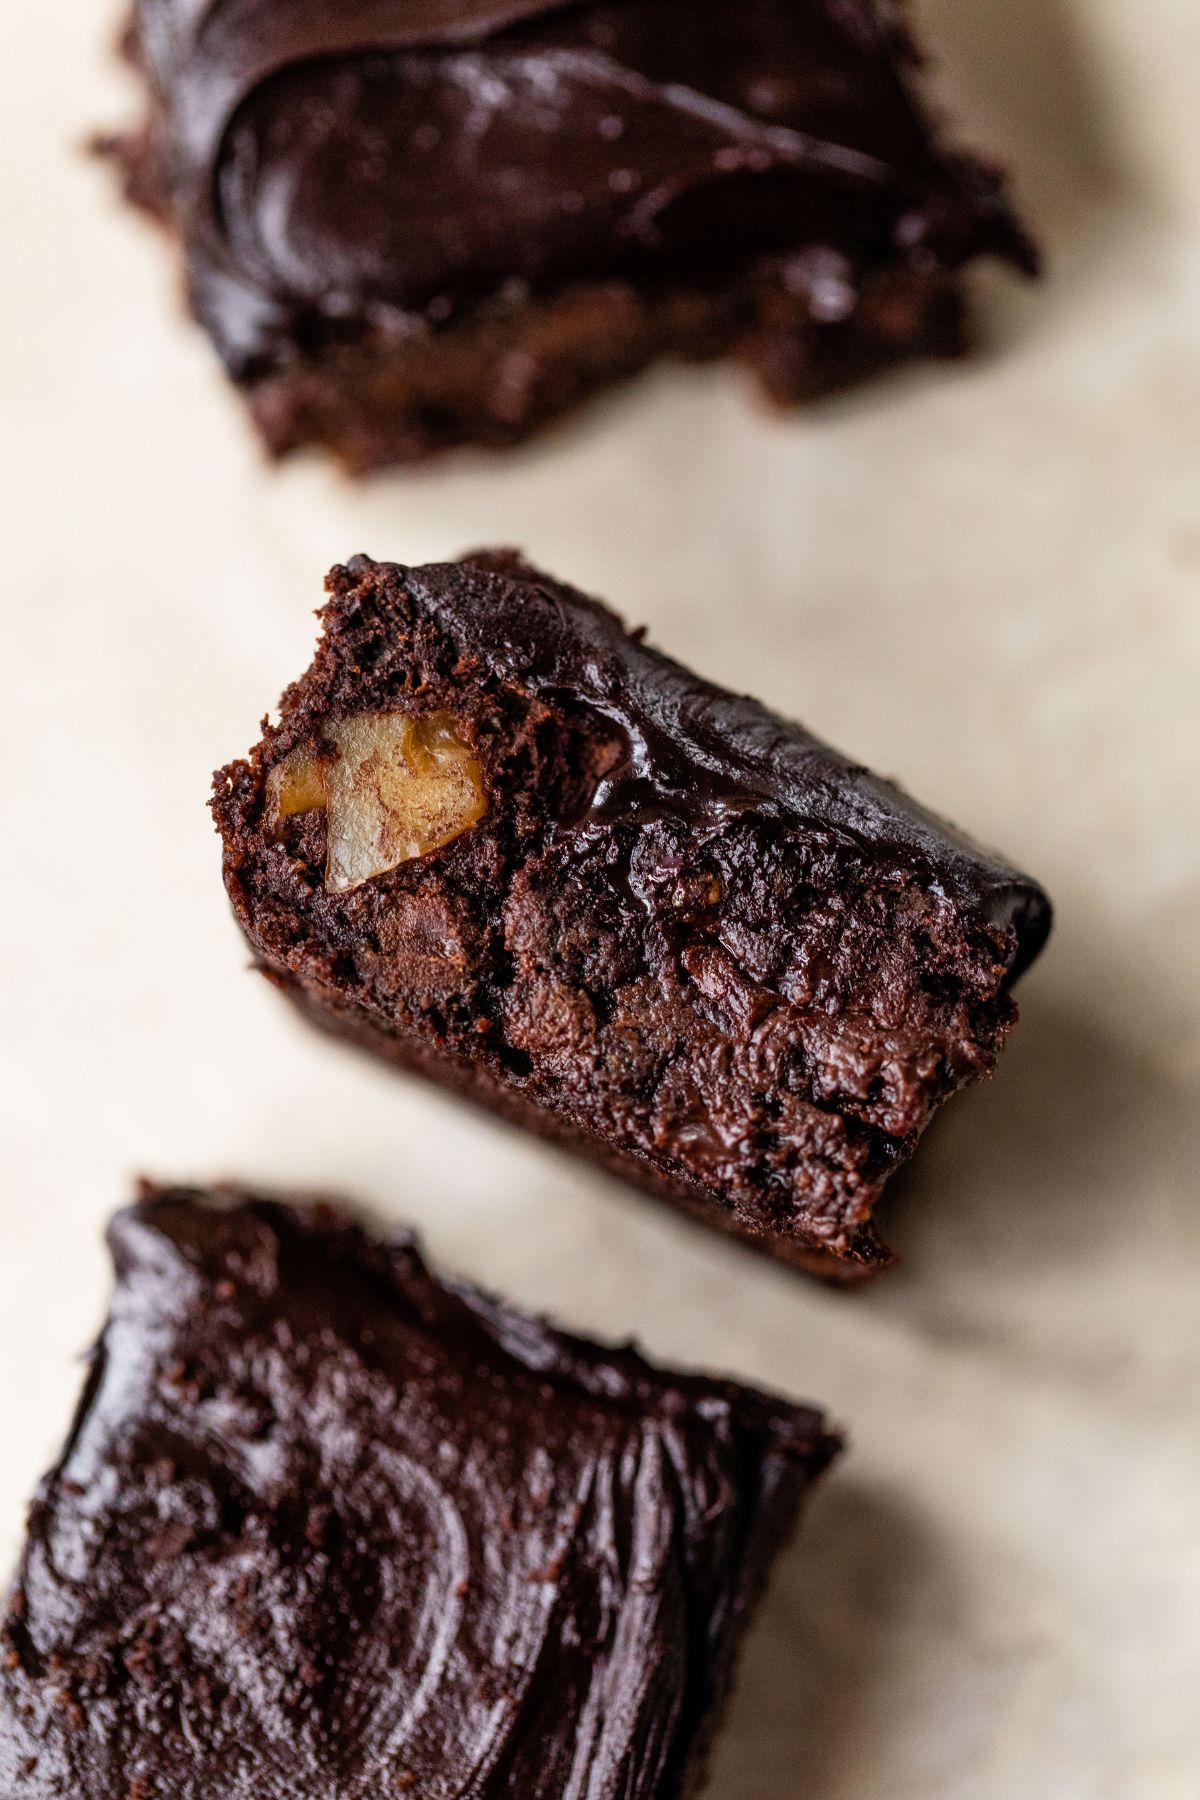 Sliced brownies with nuts.